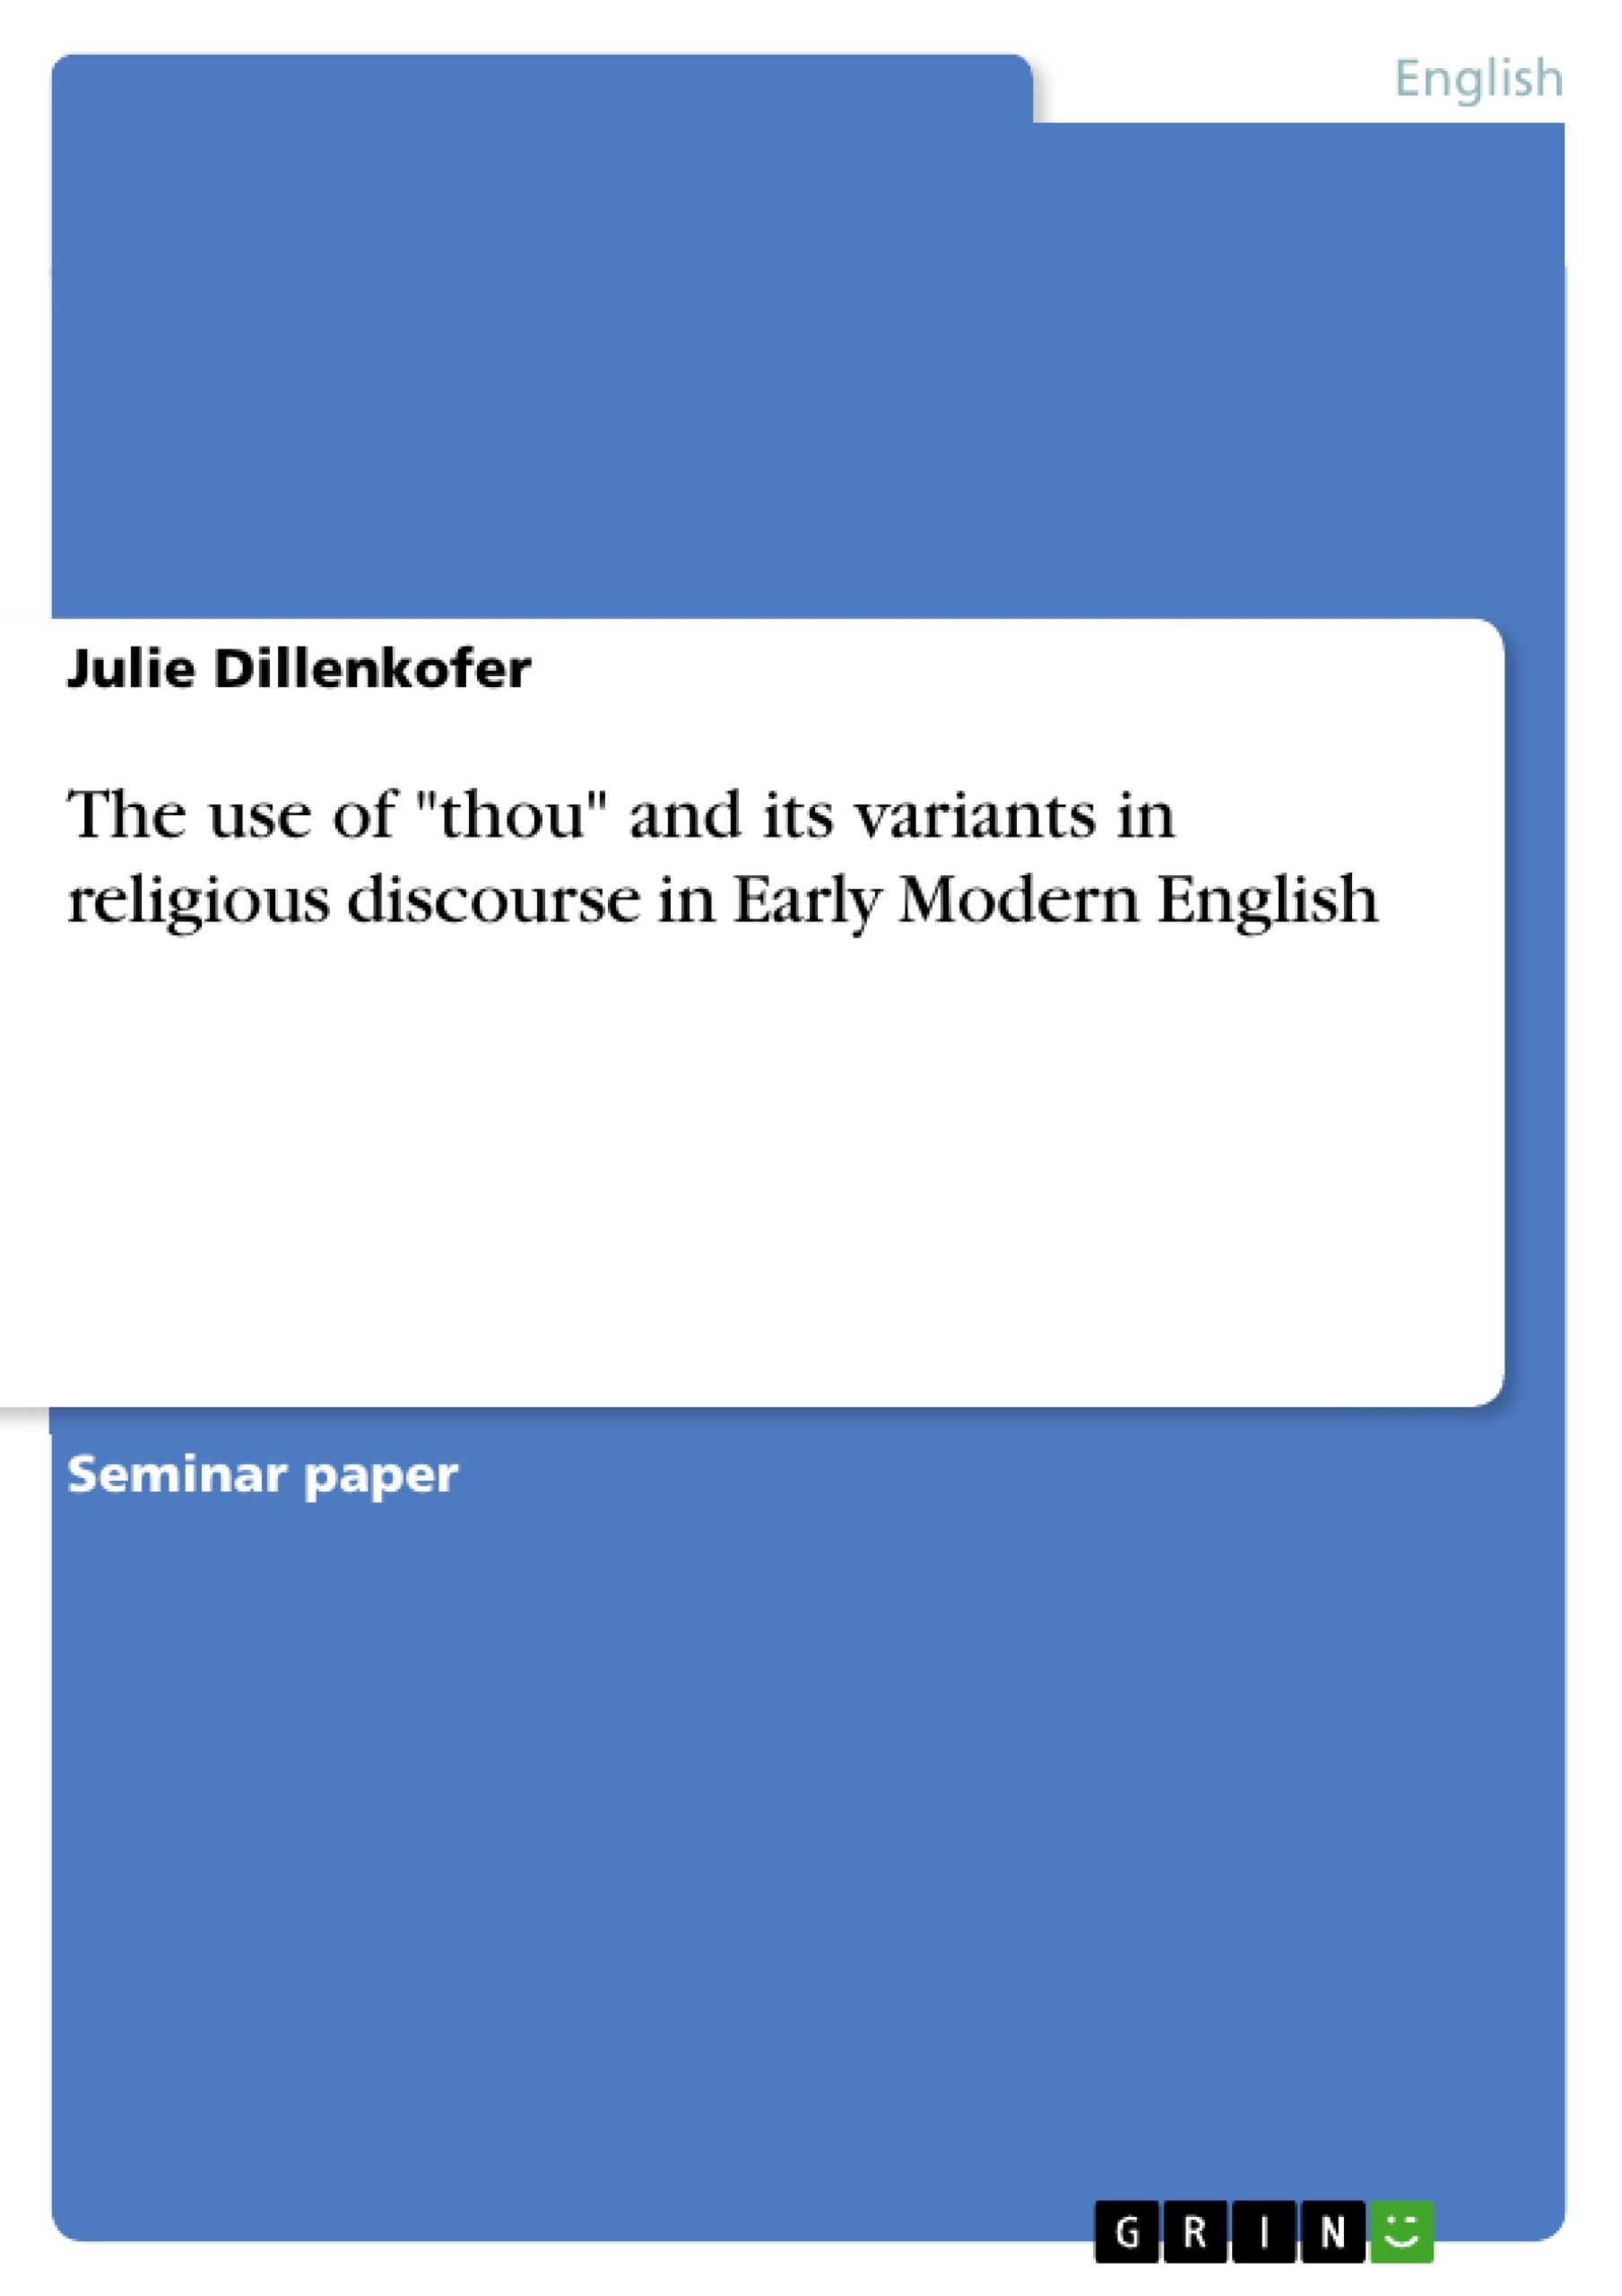 Title: The use of "thou" and its variants in religious discourse in Early Modern English